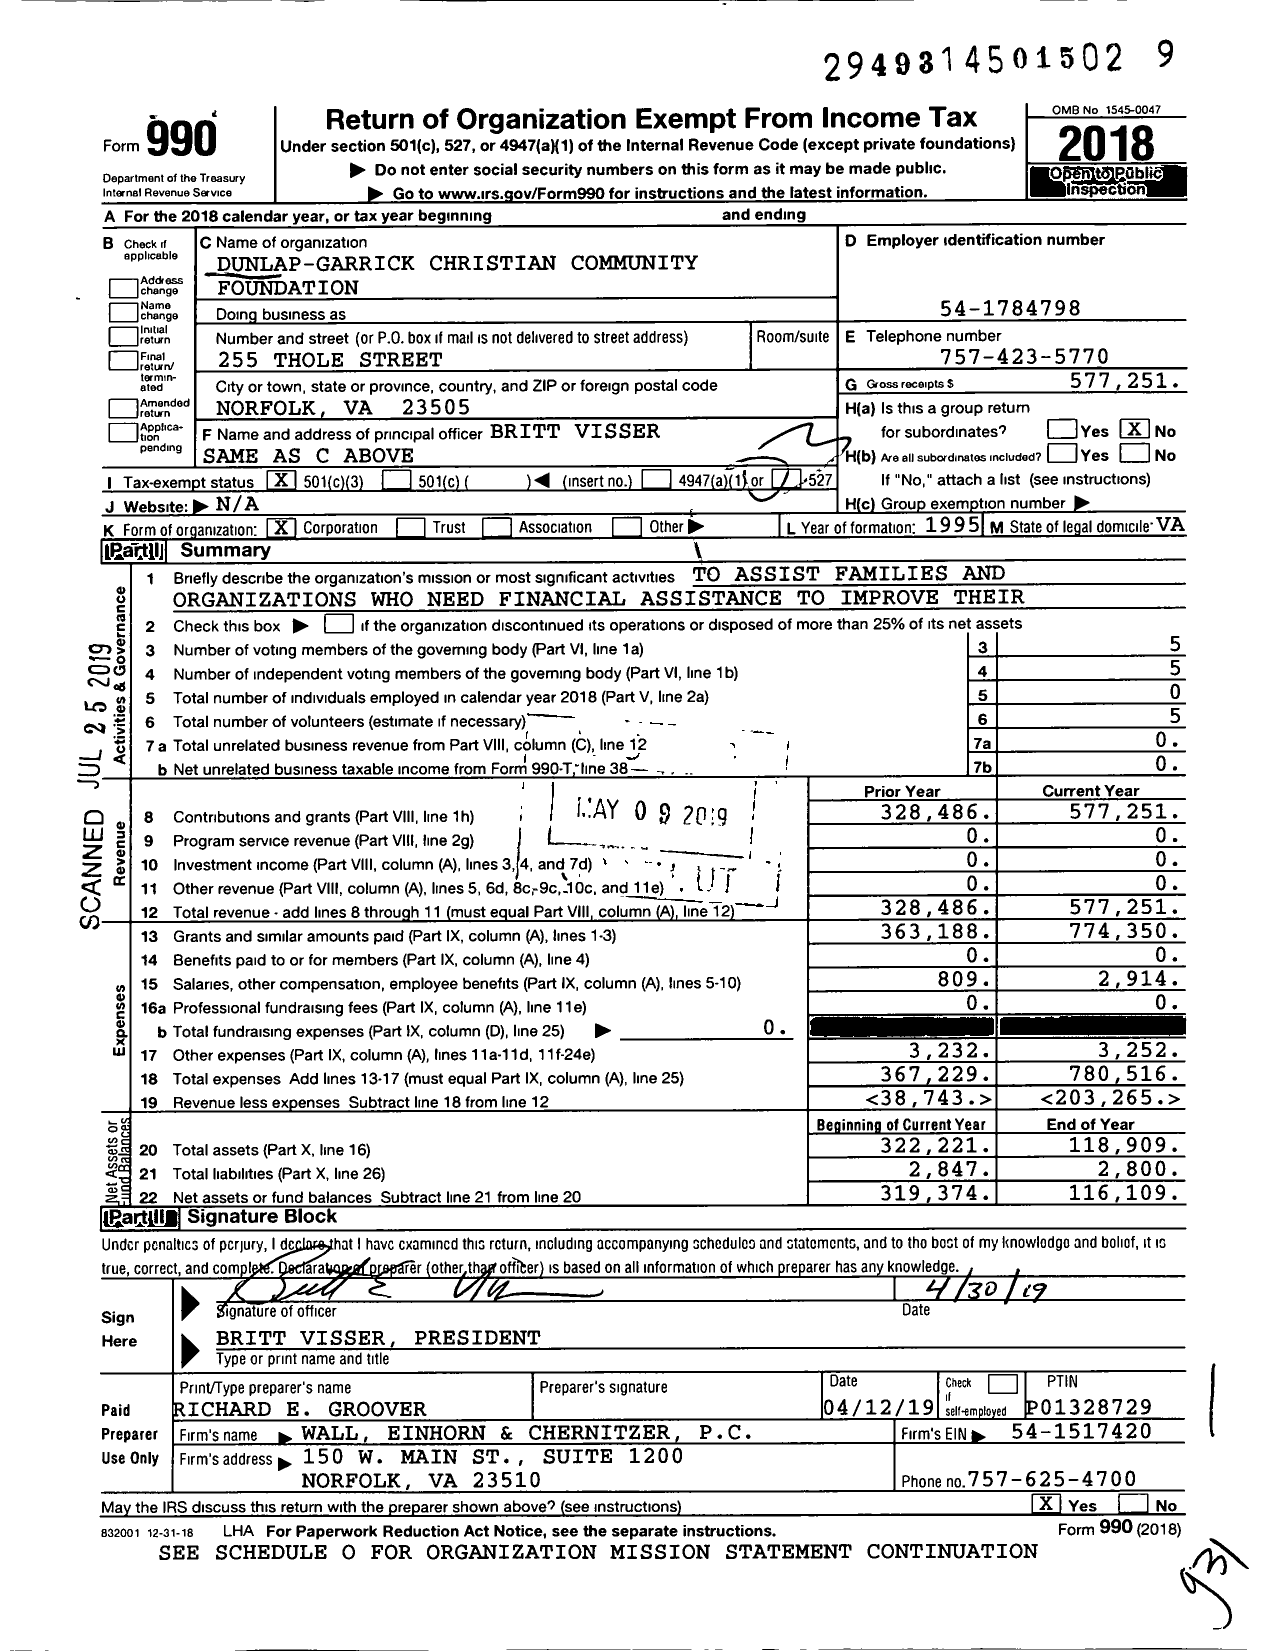 Image of first page of 2018 Form 990 for Dunlap-Garrick Christian Community Foundation